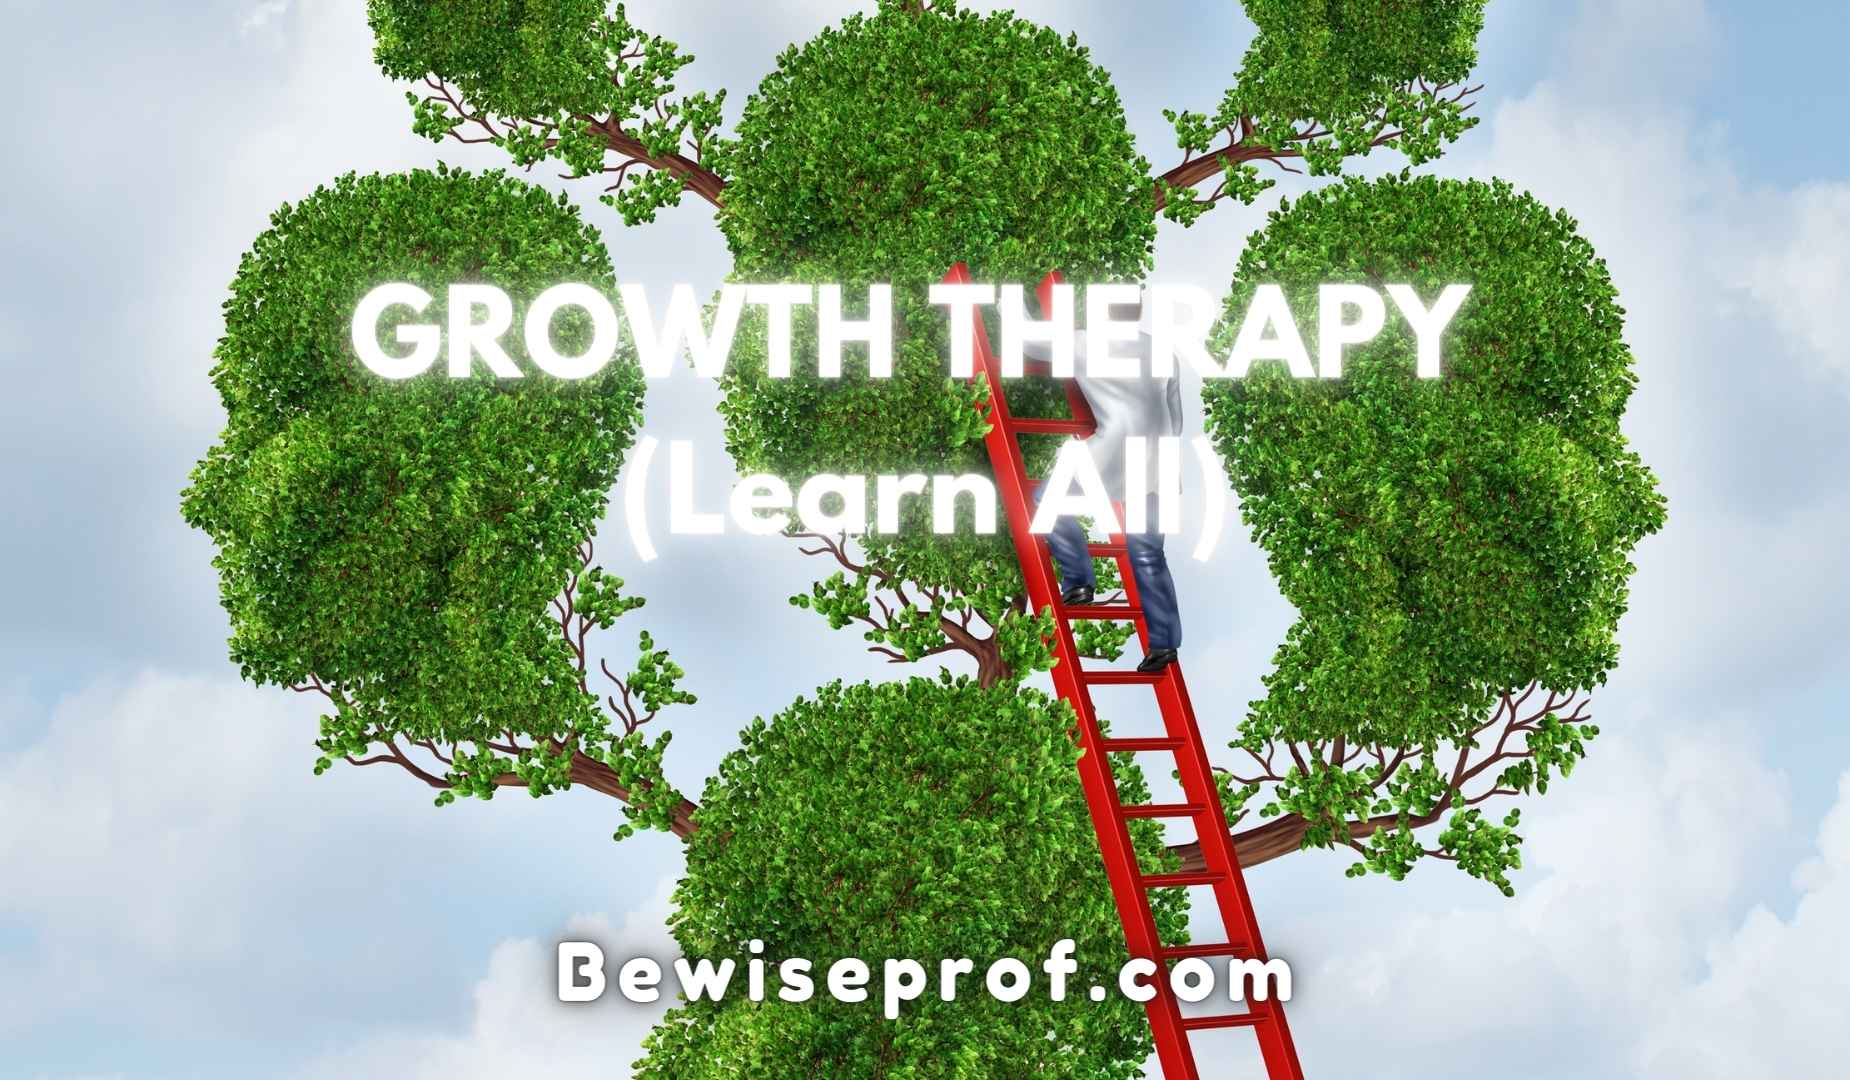 GROWTH THERAPY